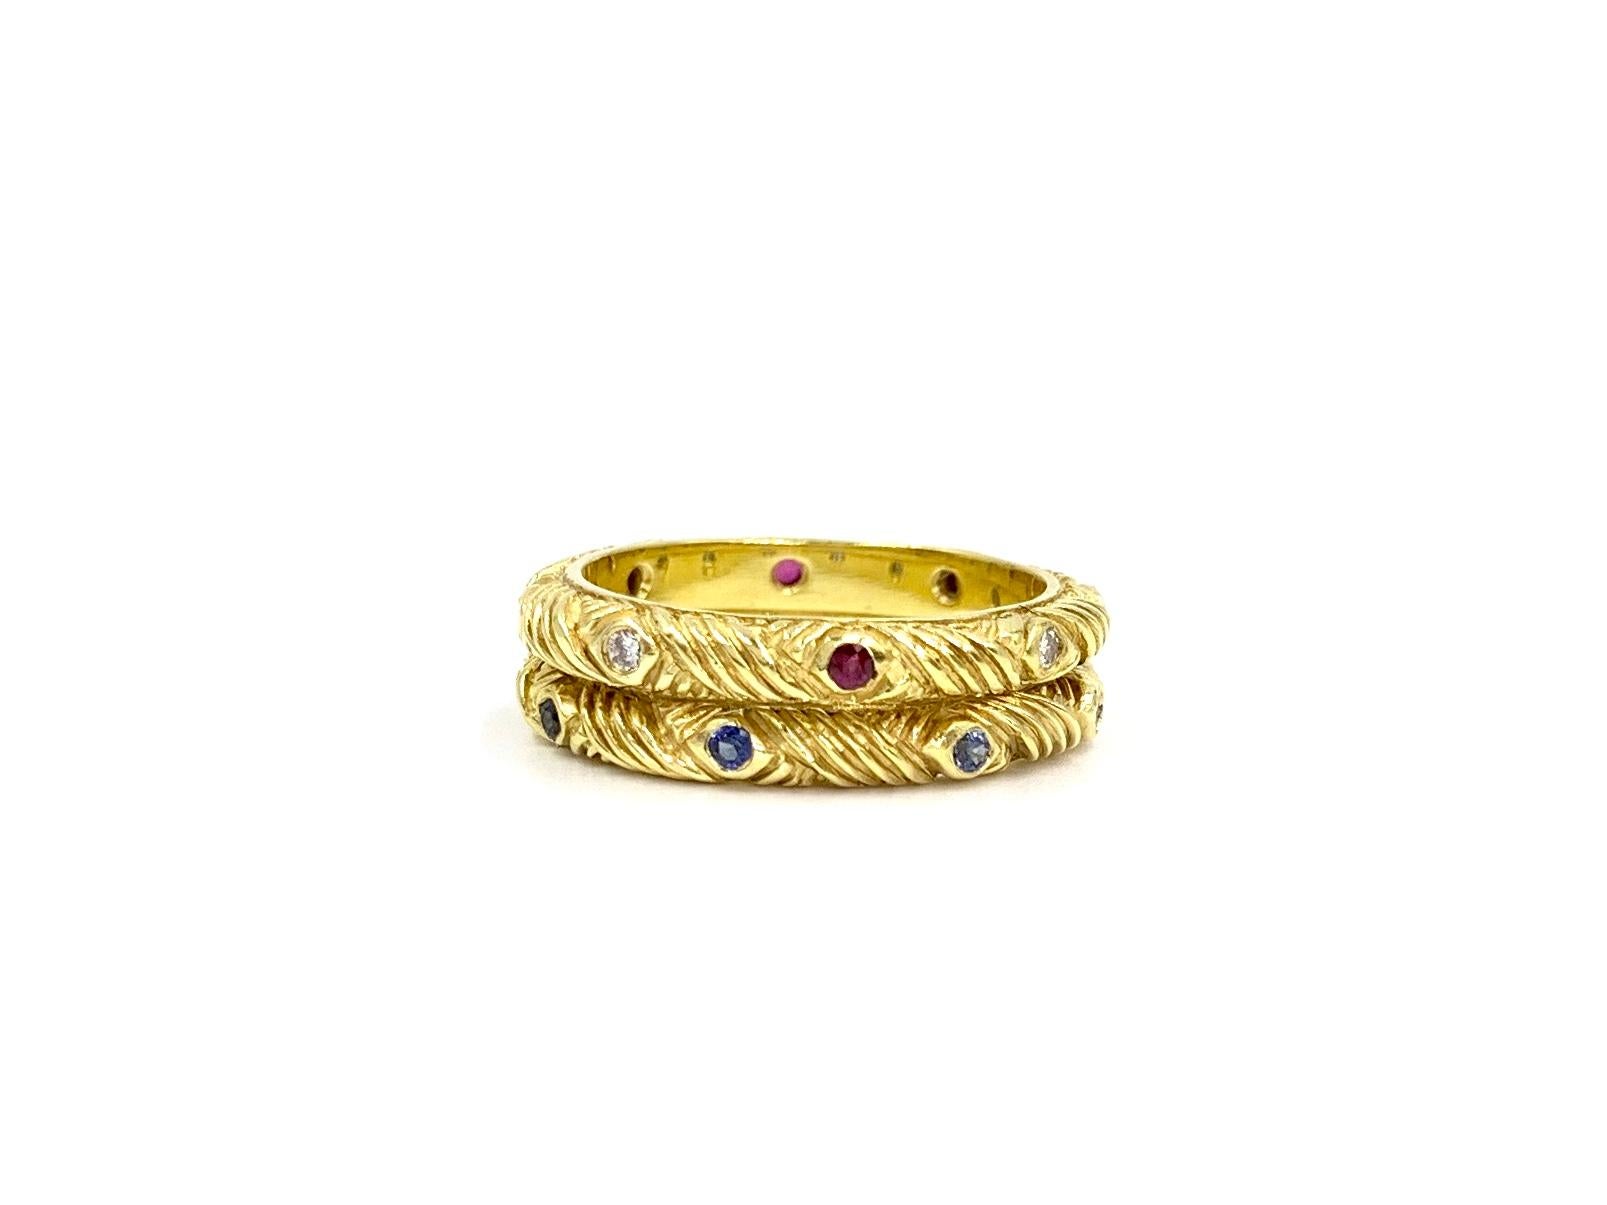 Set of two hand carved 18 karat yellow gold stackable 3mm band rings by JJ Marco. One band features 8 blue sapphires at .20 carats total weight. The other band features alternating diamonds and rubies with .08 carats of diamonds and .10 carats of